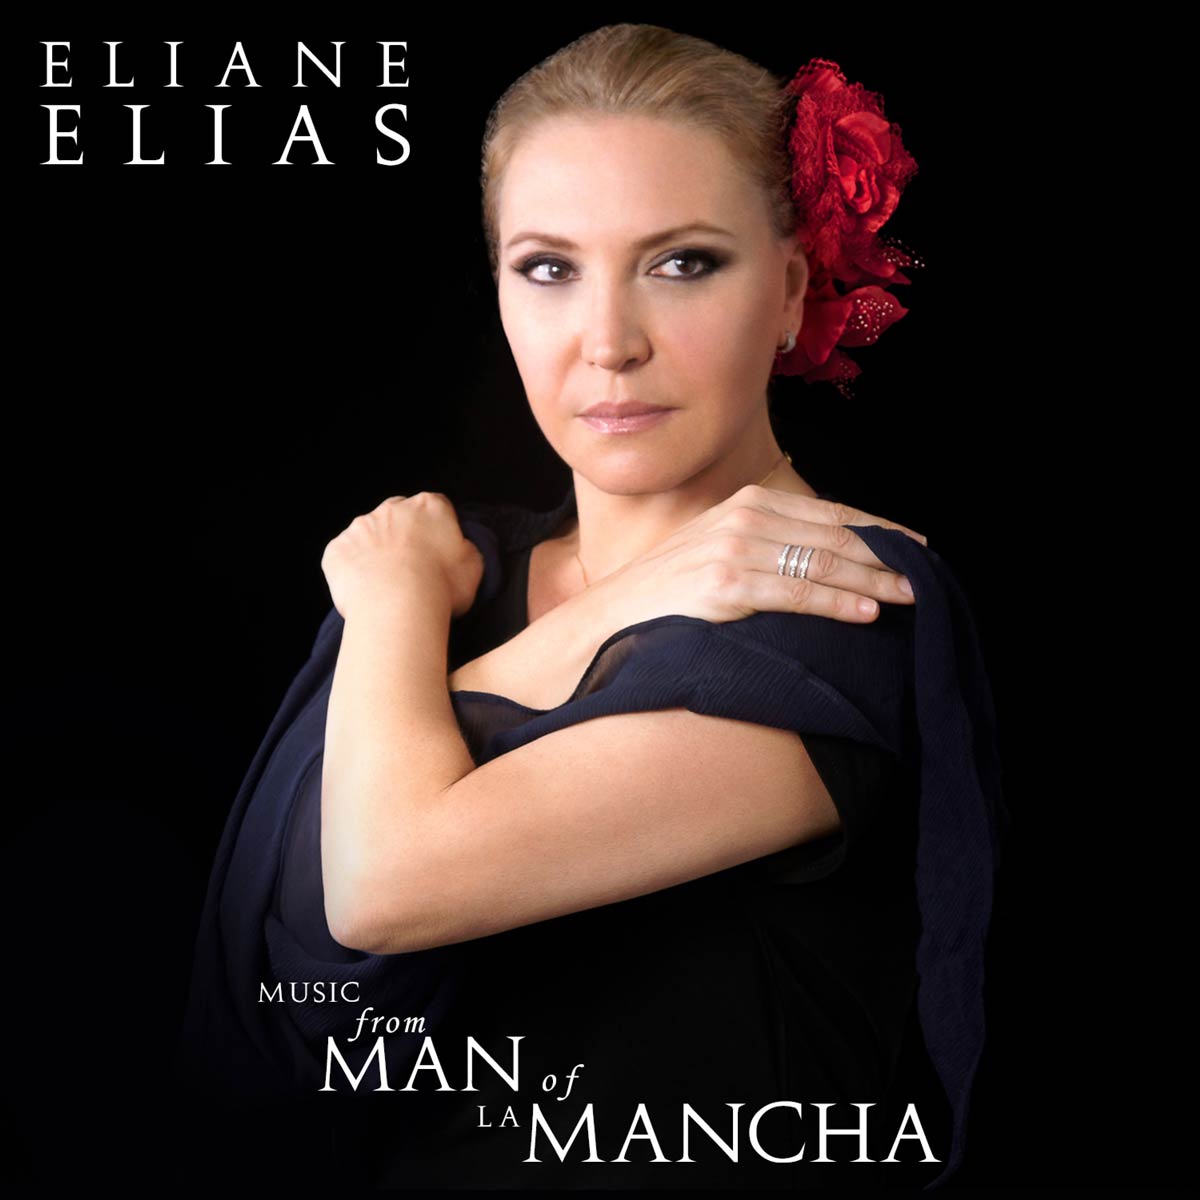 Featured Image for “MUSIC FROM MAN OF LA MANCHA”